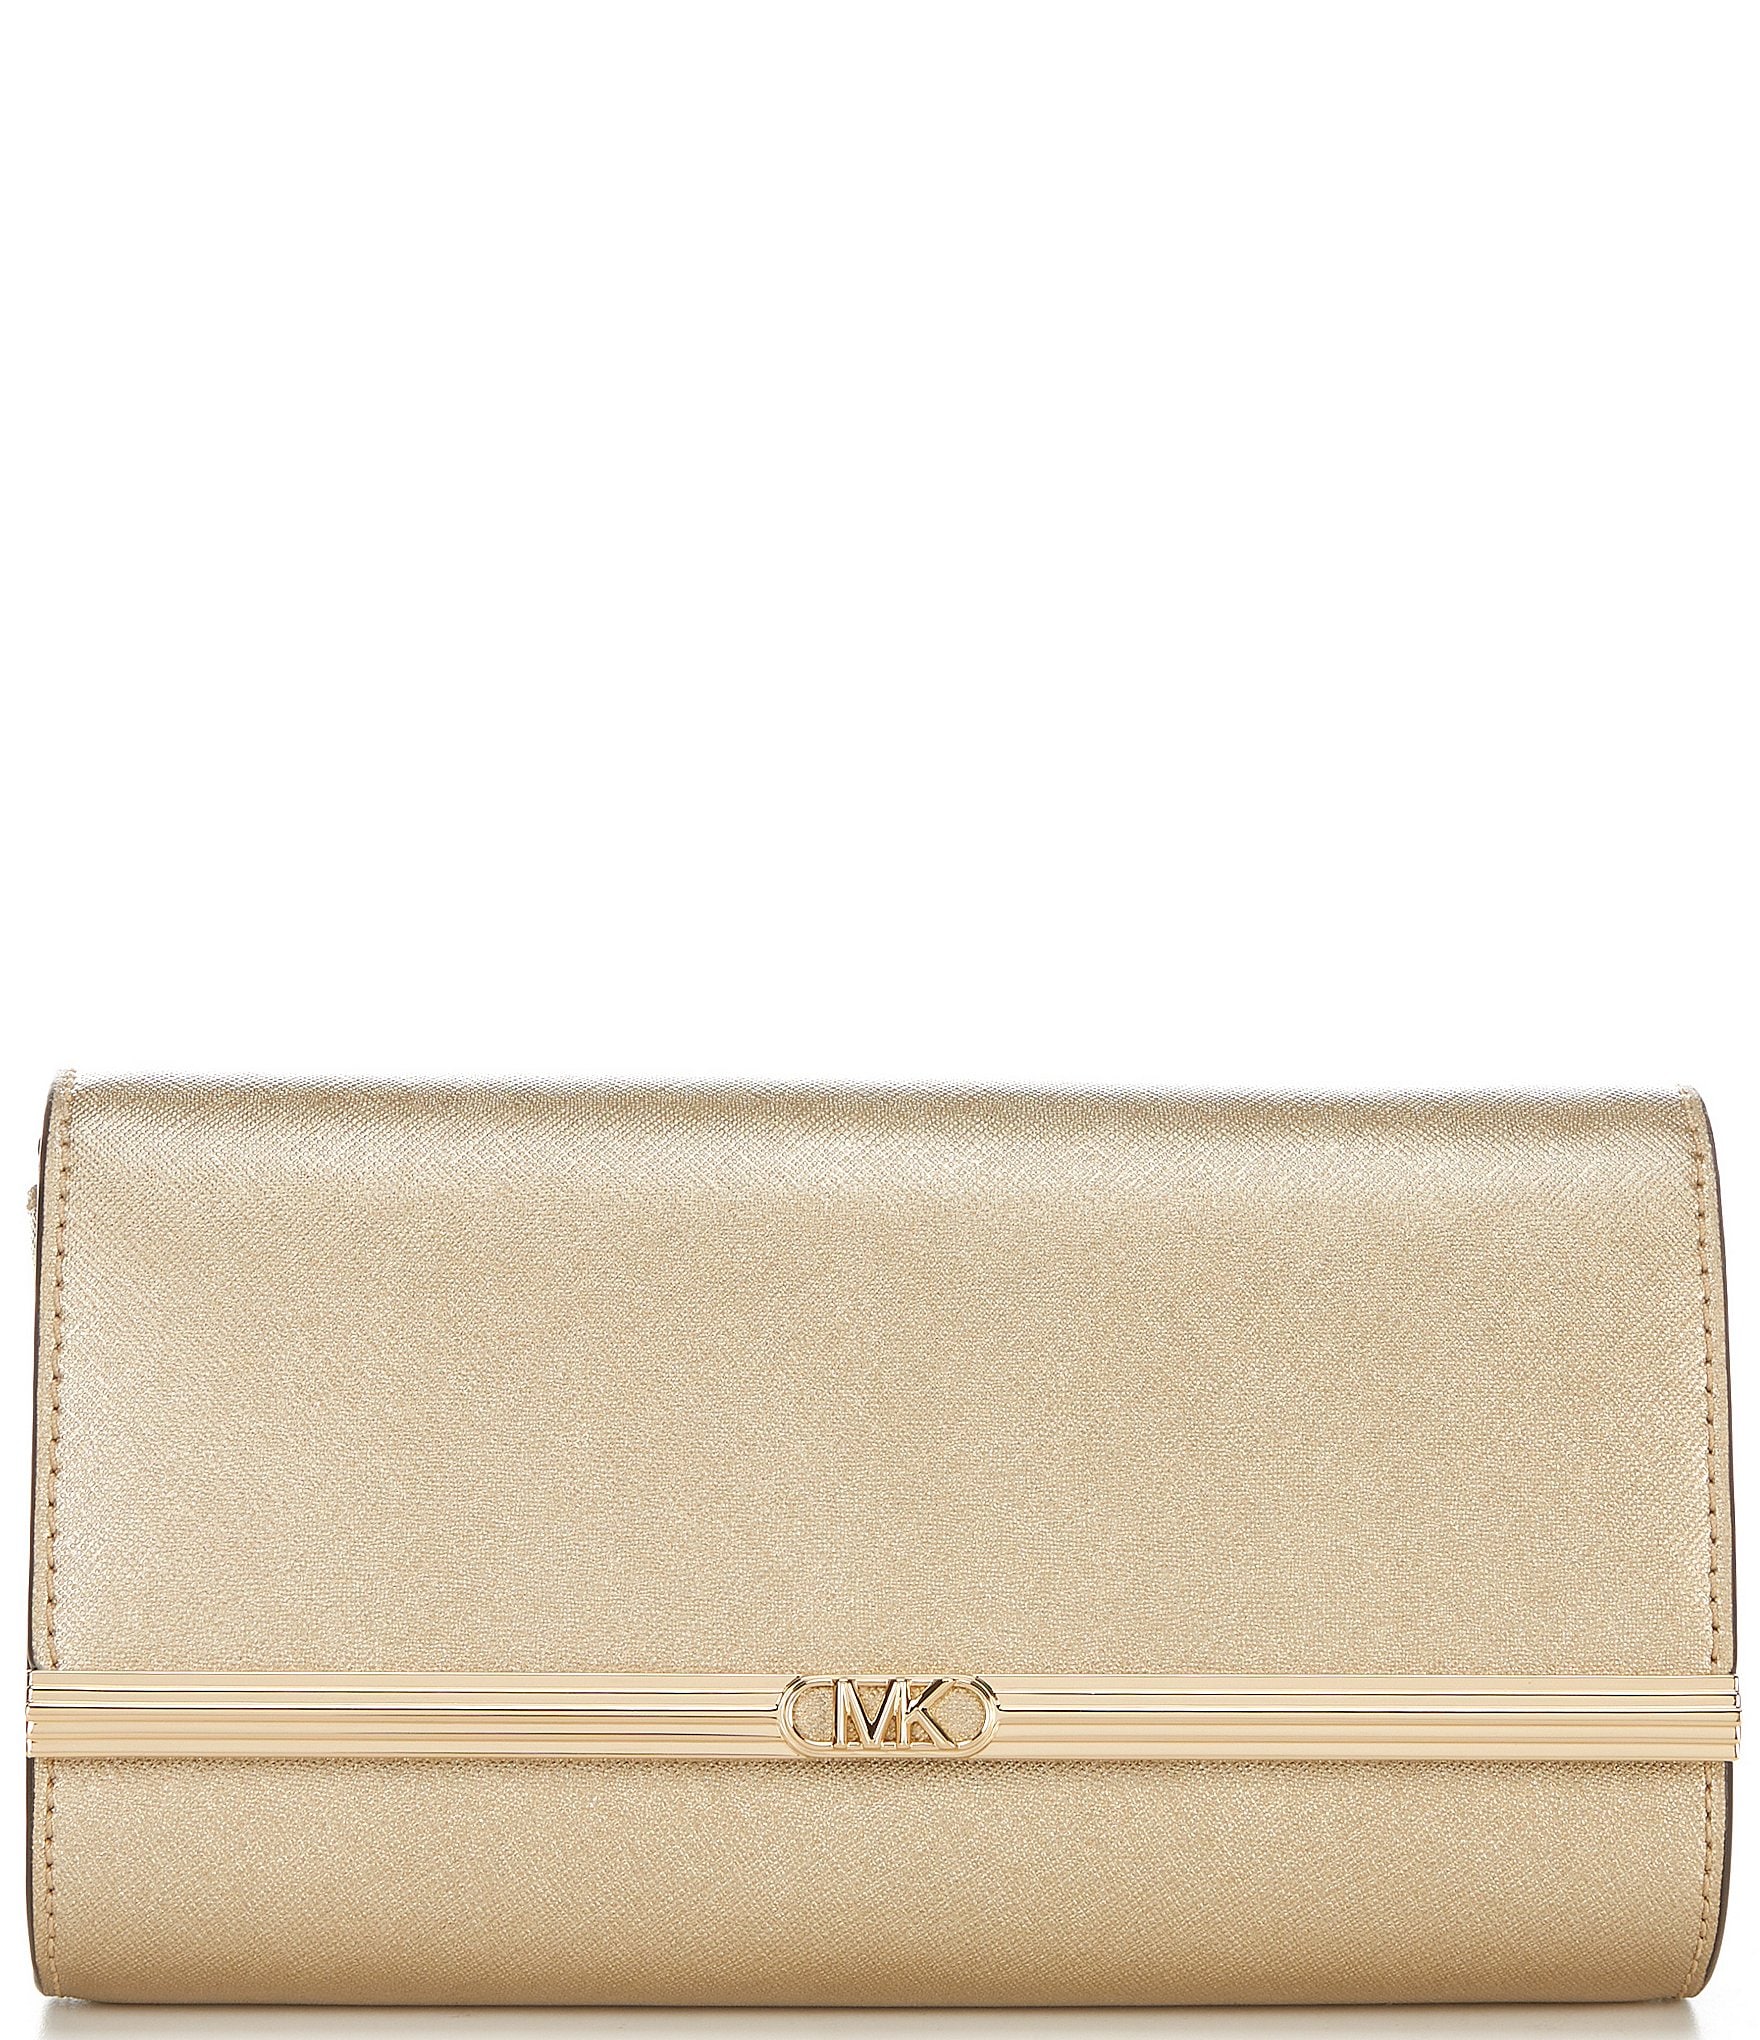 Michael Kors Chelsea Large Metallic Leather Convertible Clutch - Pale Gold